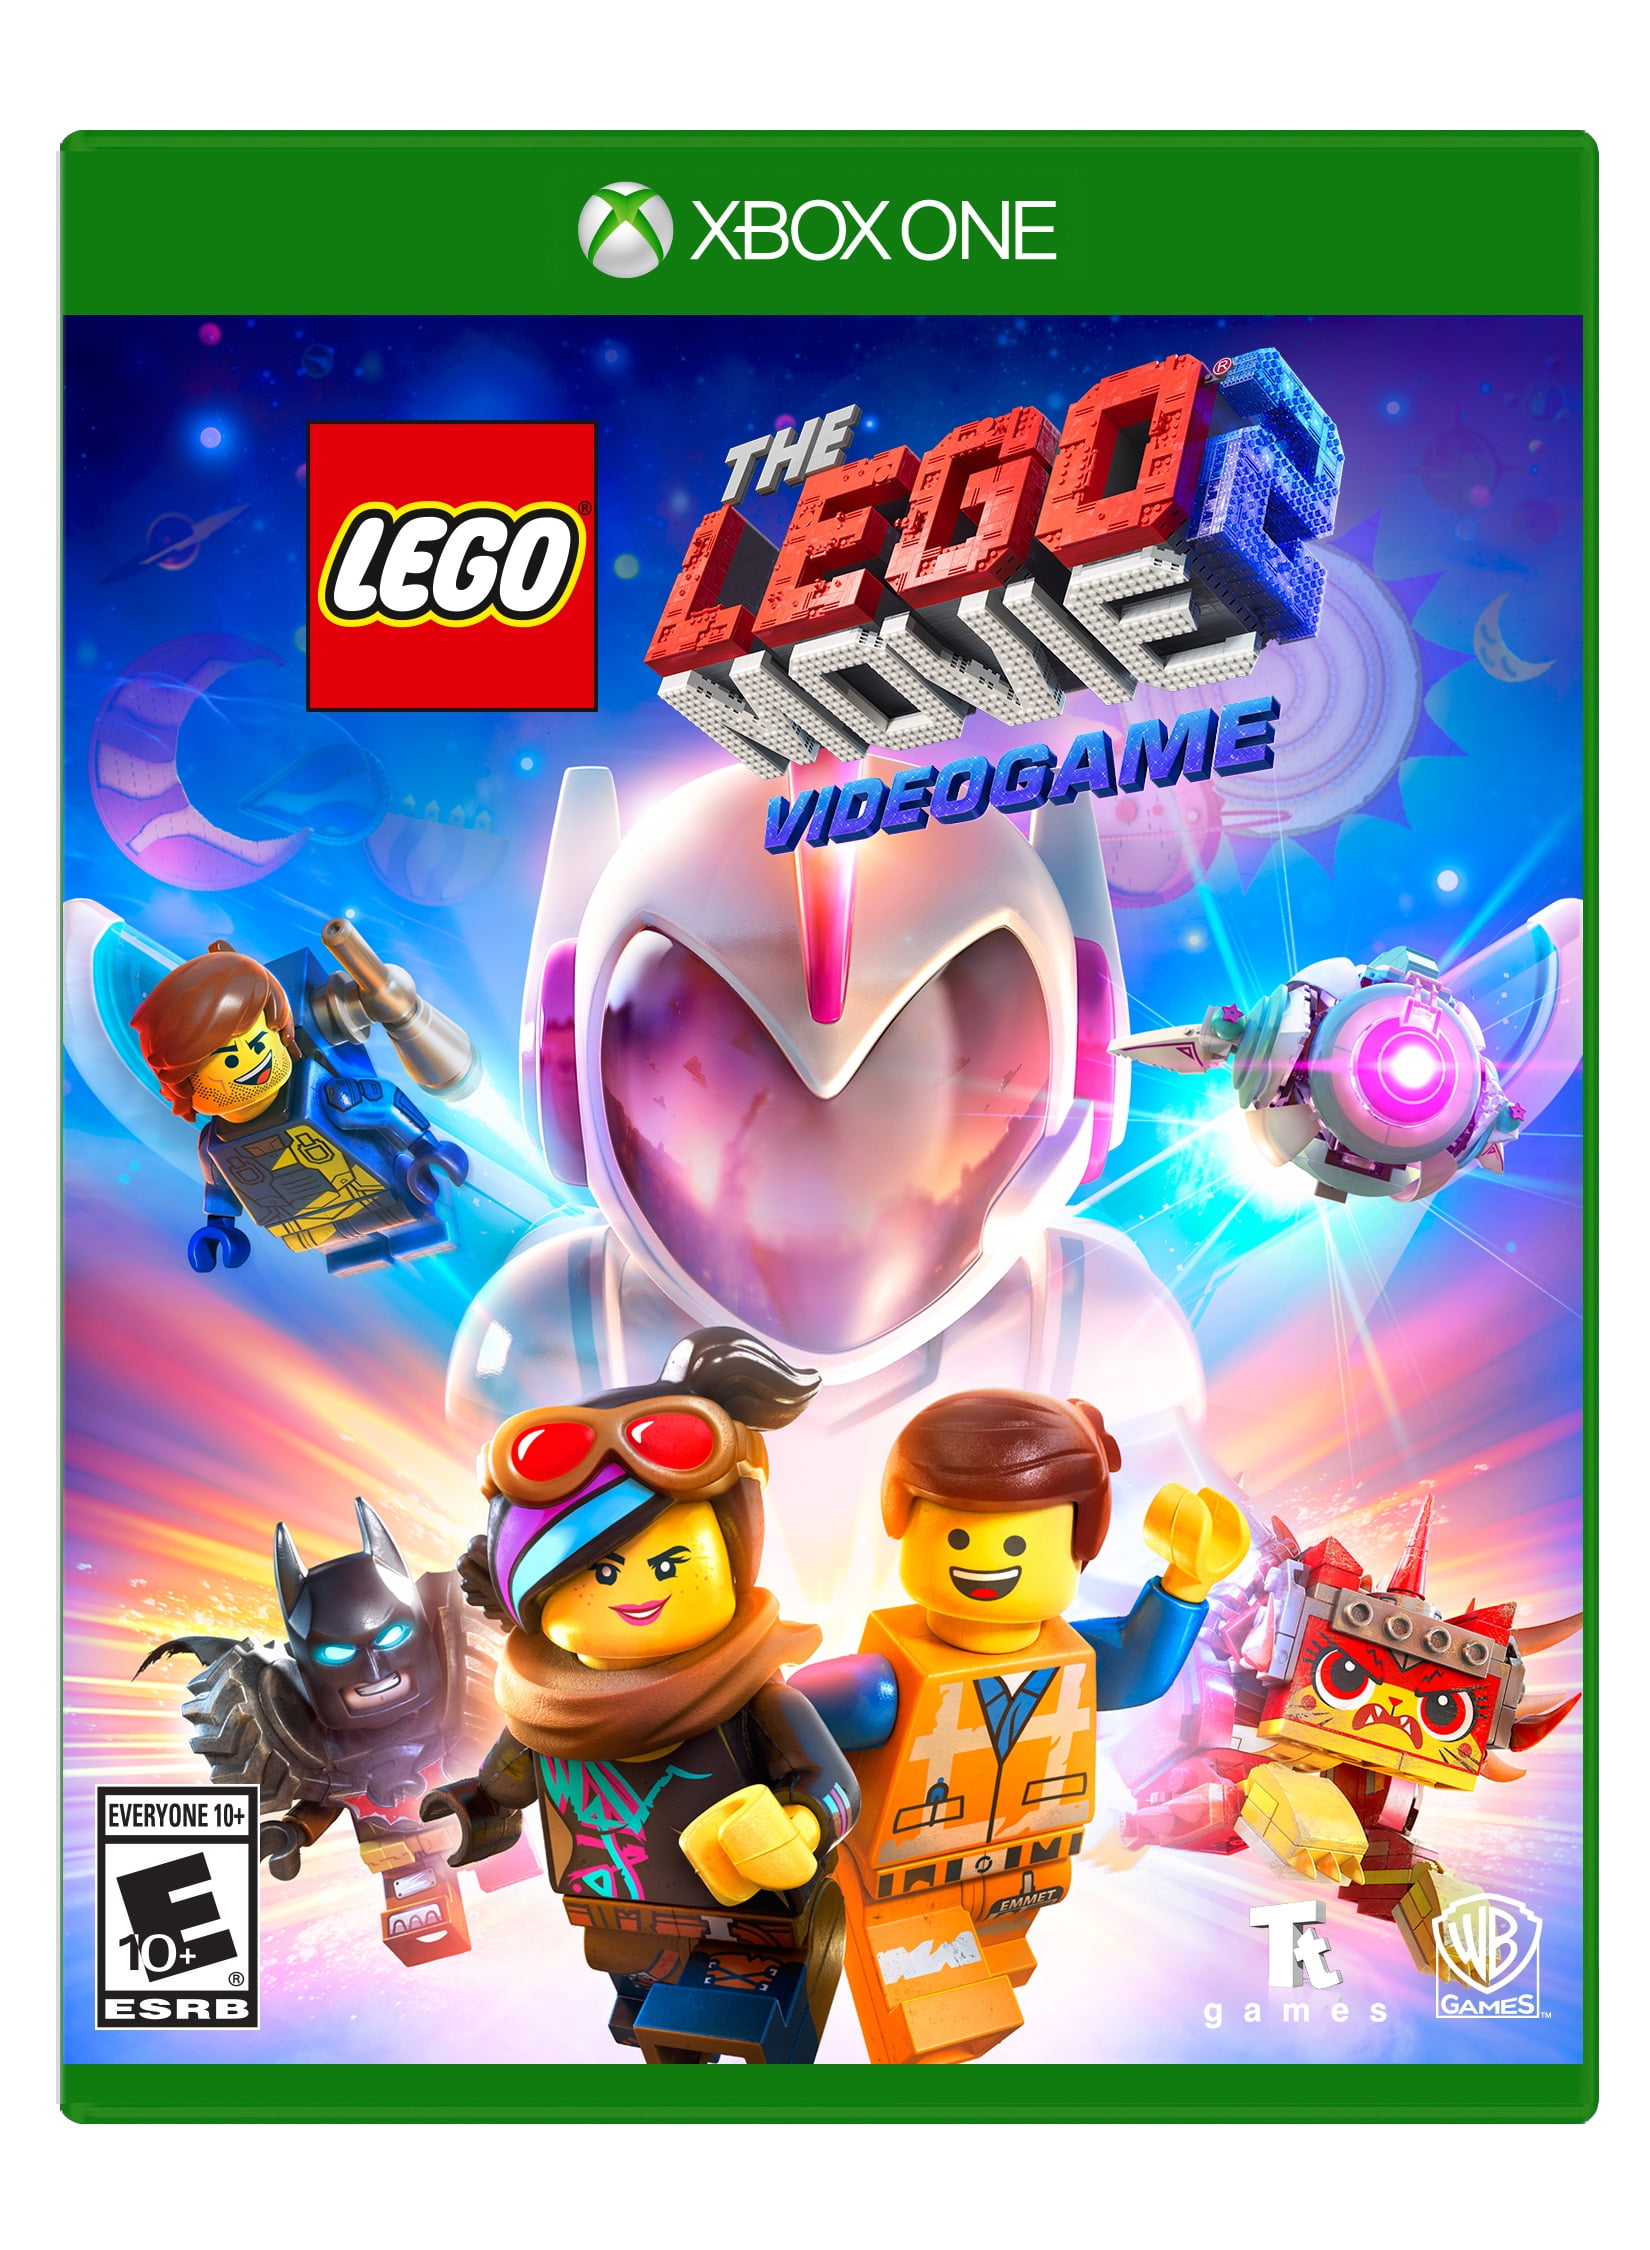 The LEGO Movie Videogame - IGN